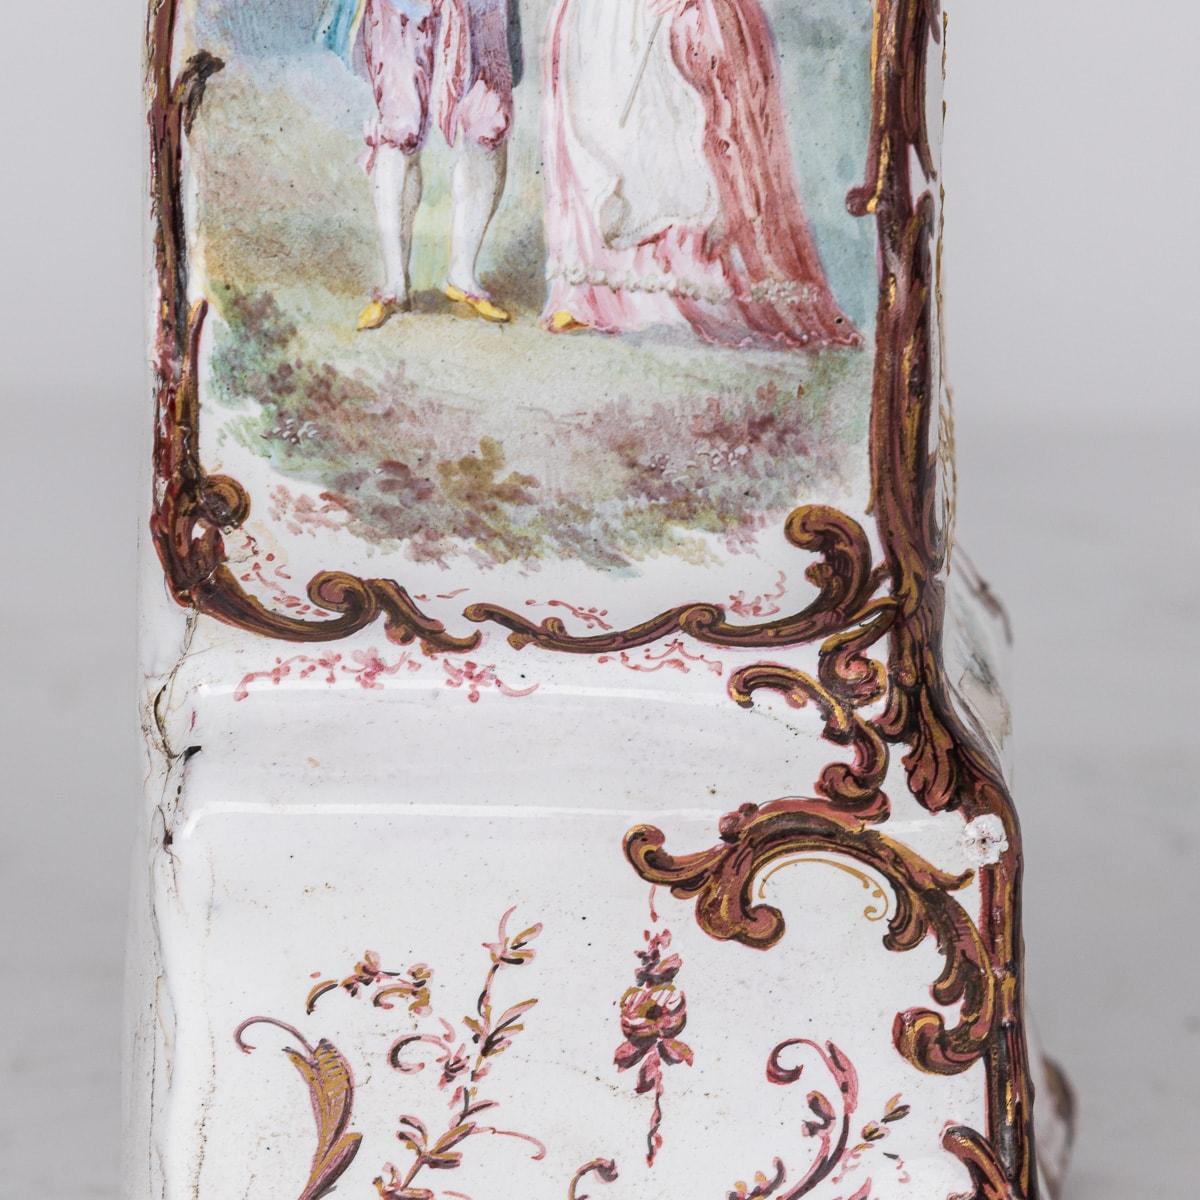 18th Century English Enamel Table Clock With Floral & Romantic Scenes c.1770 For Sale 13